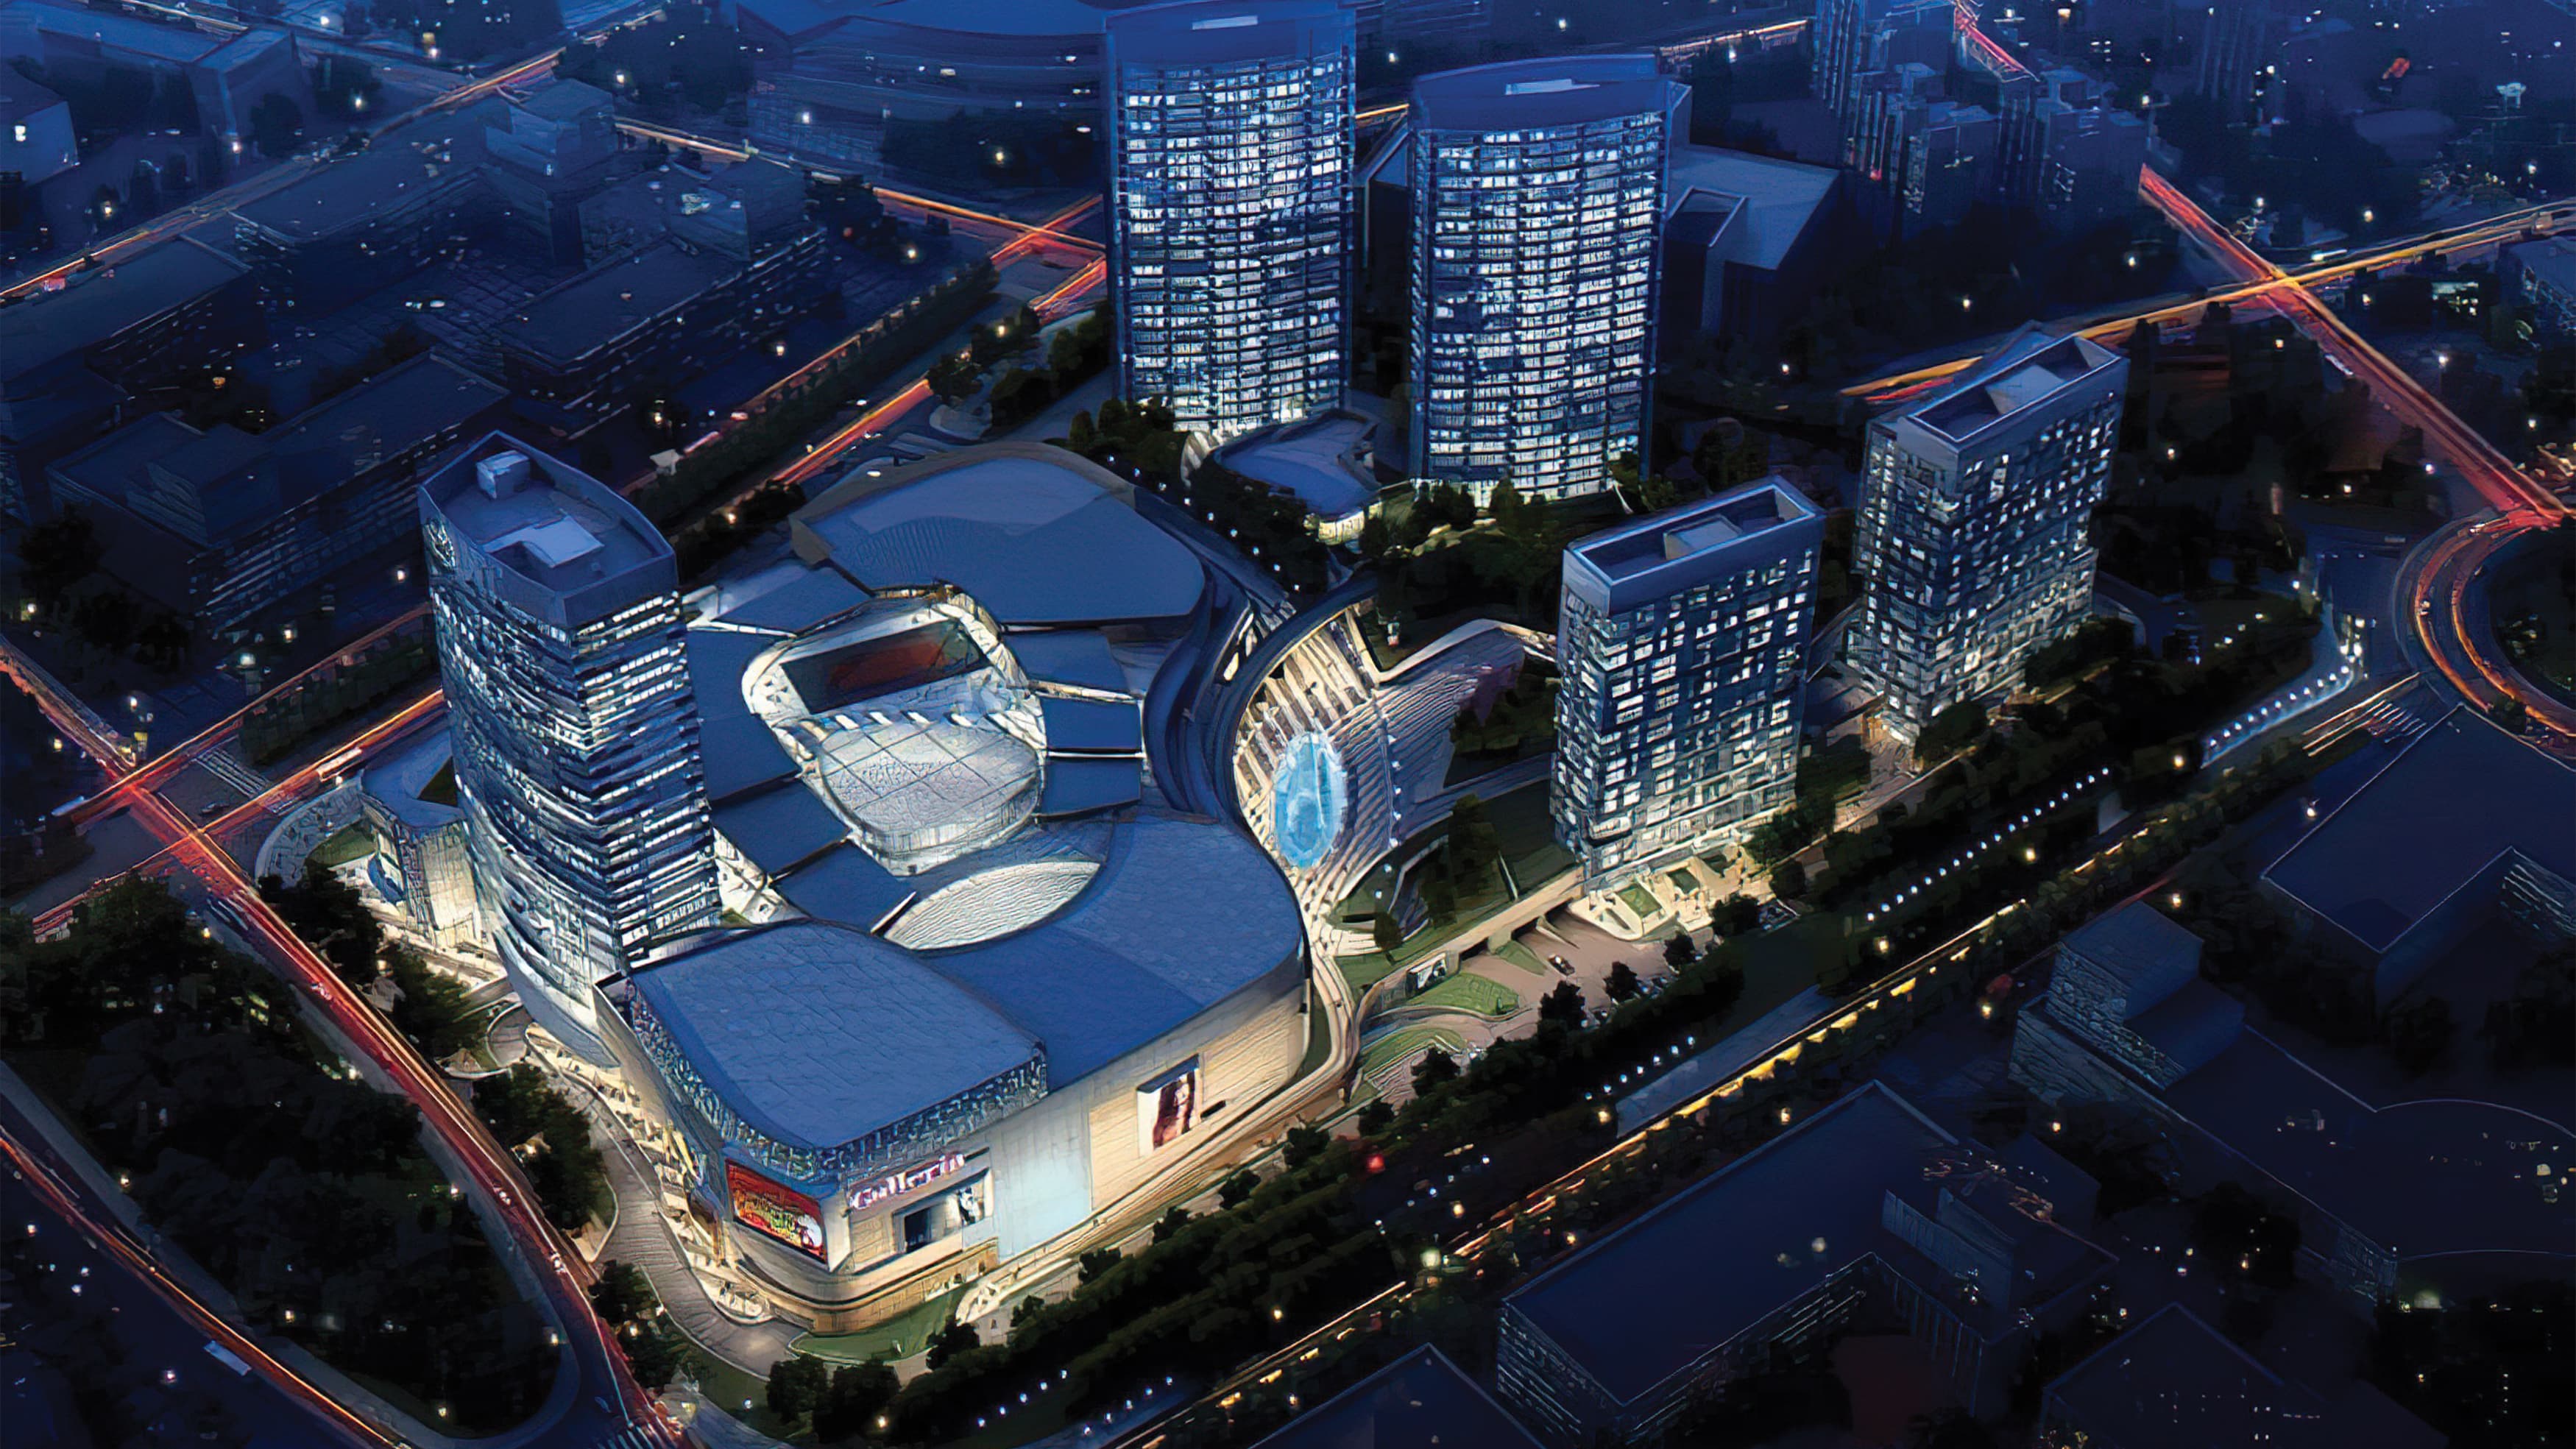 A night-time rendering of the Kardan Land Europark project